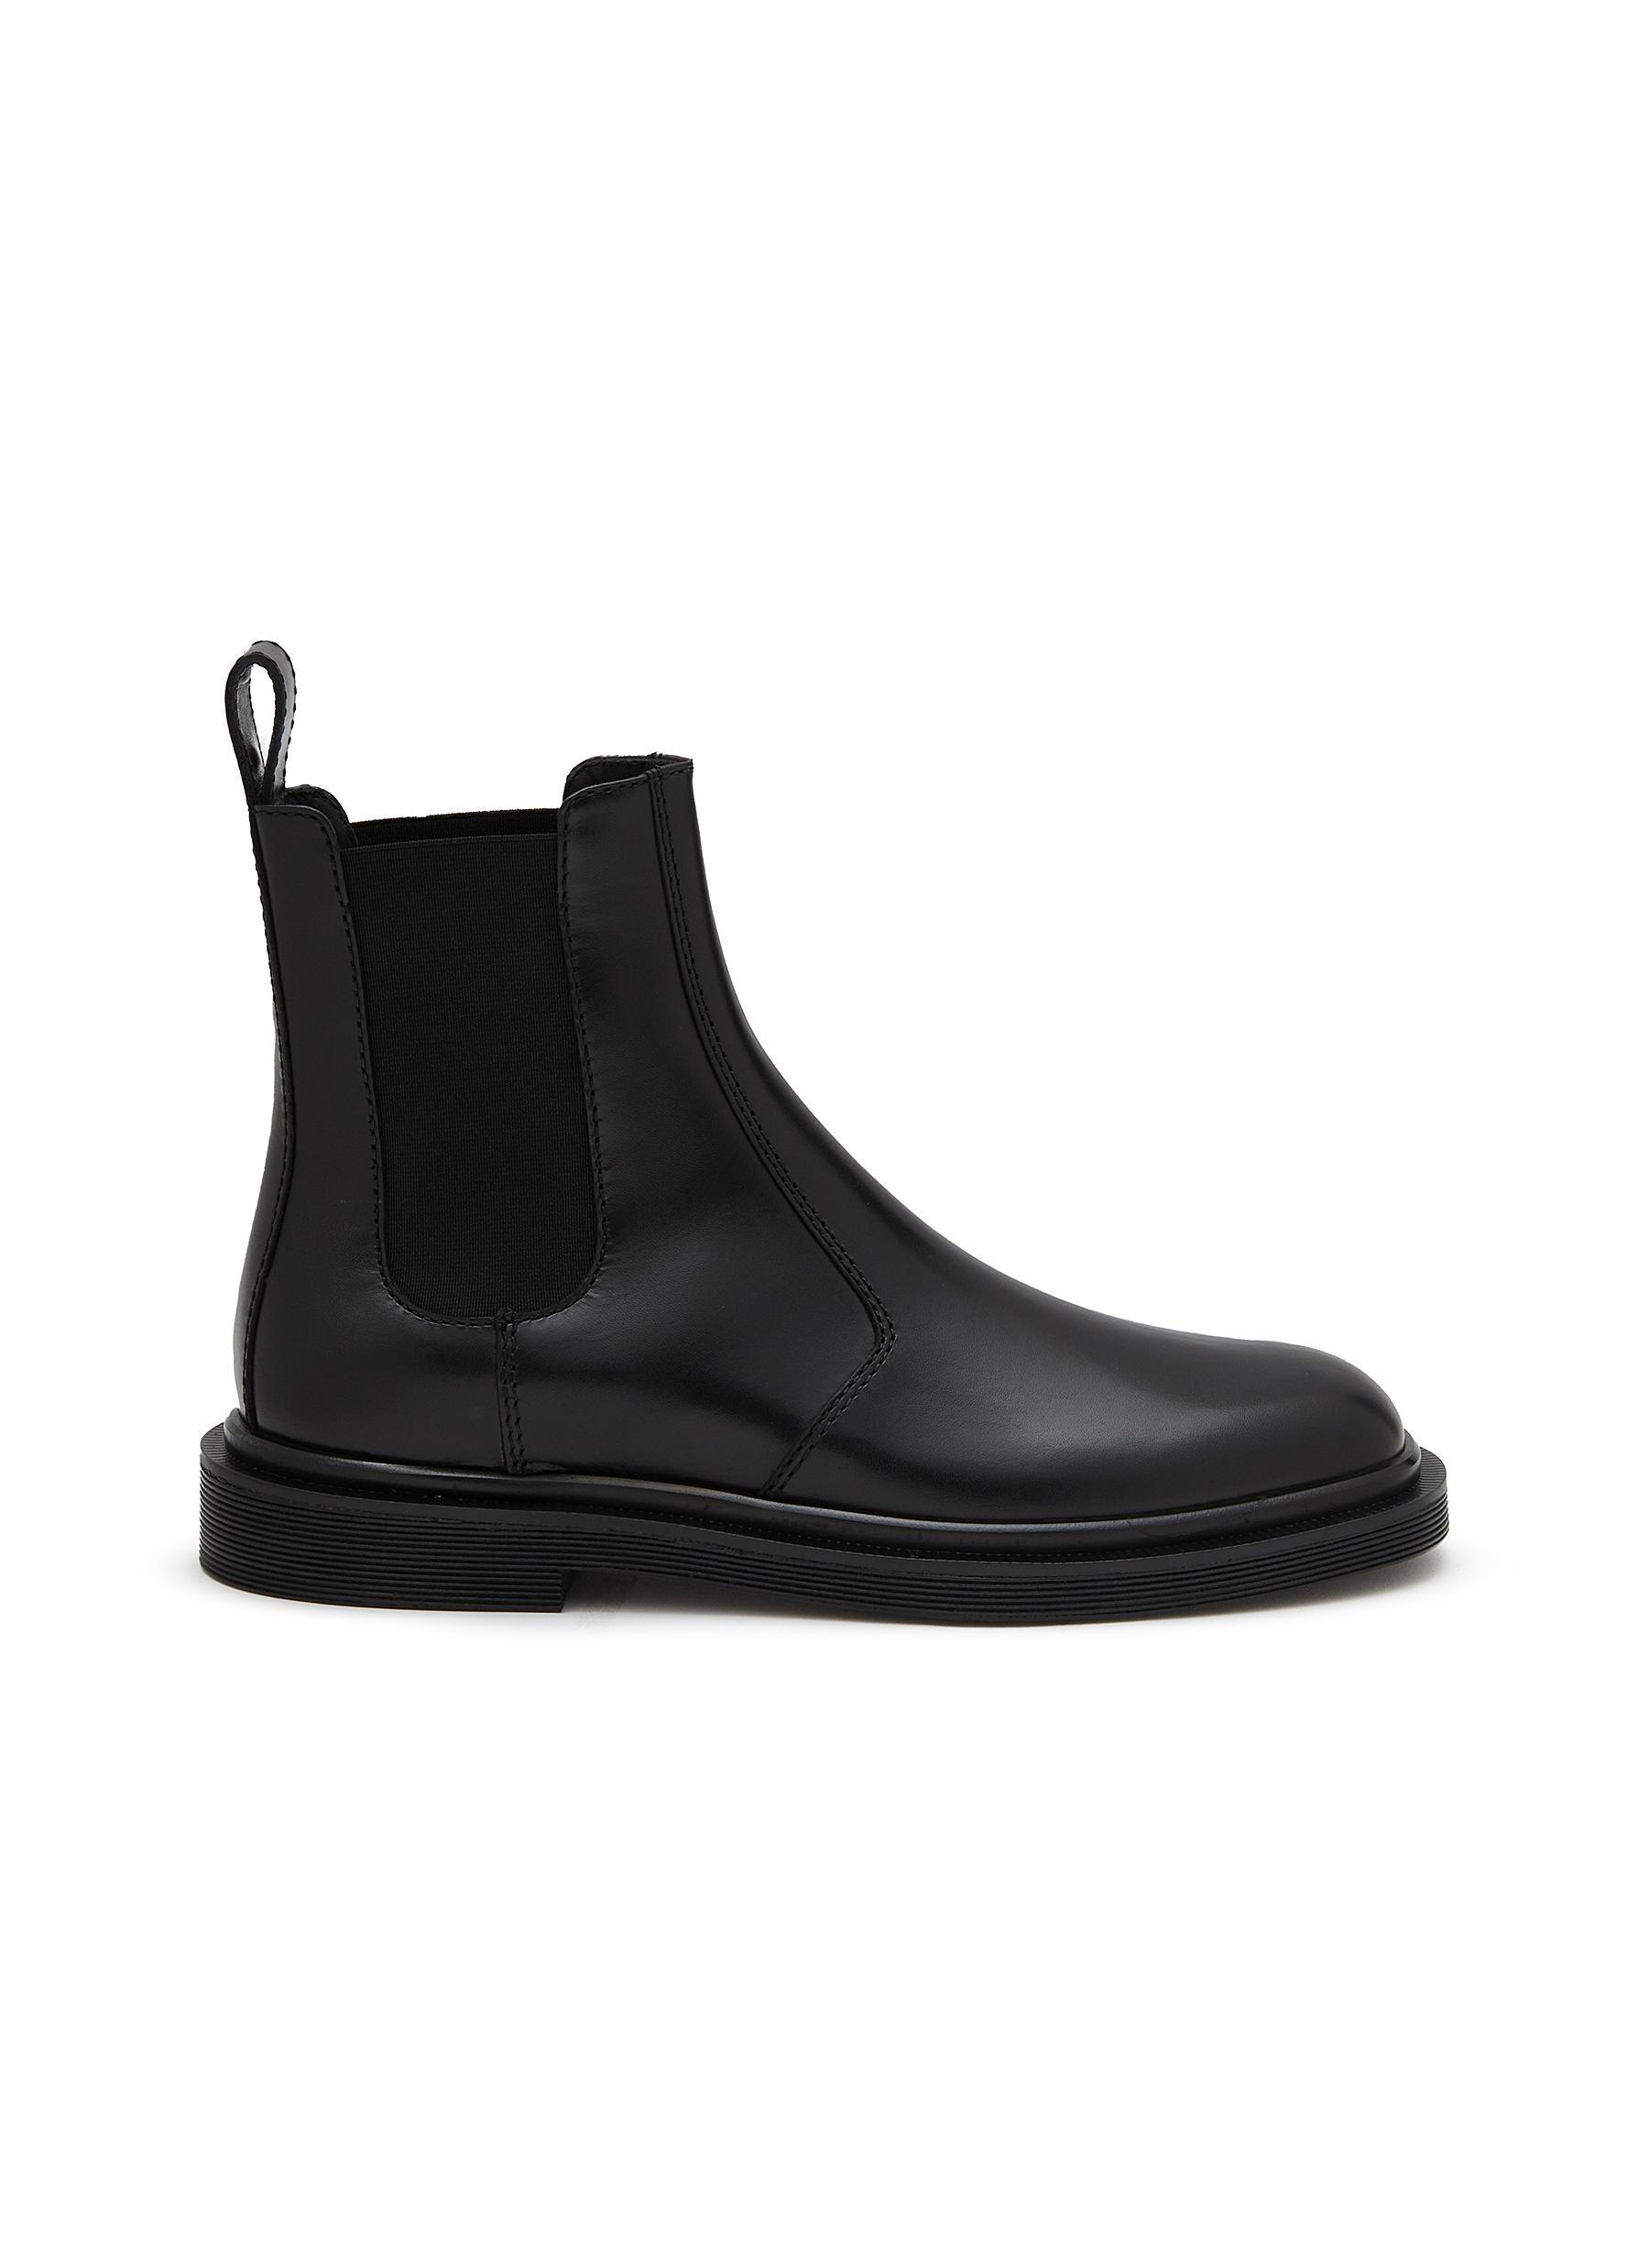 THE ROW, Ranger Leather Chelsea Boots, Women